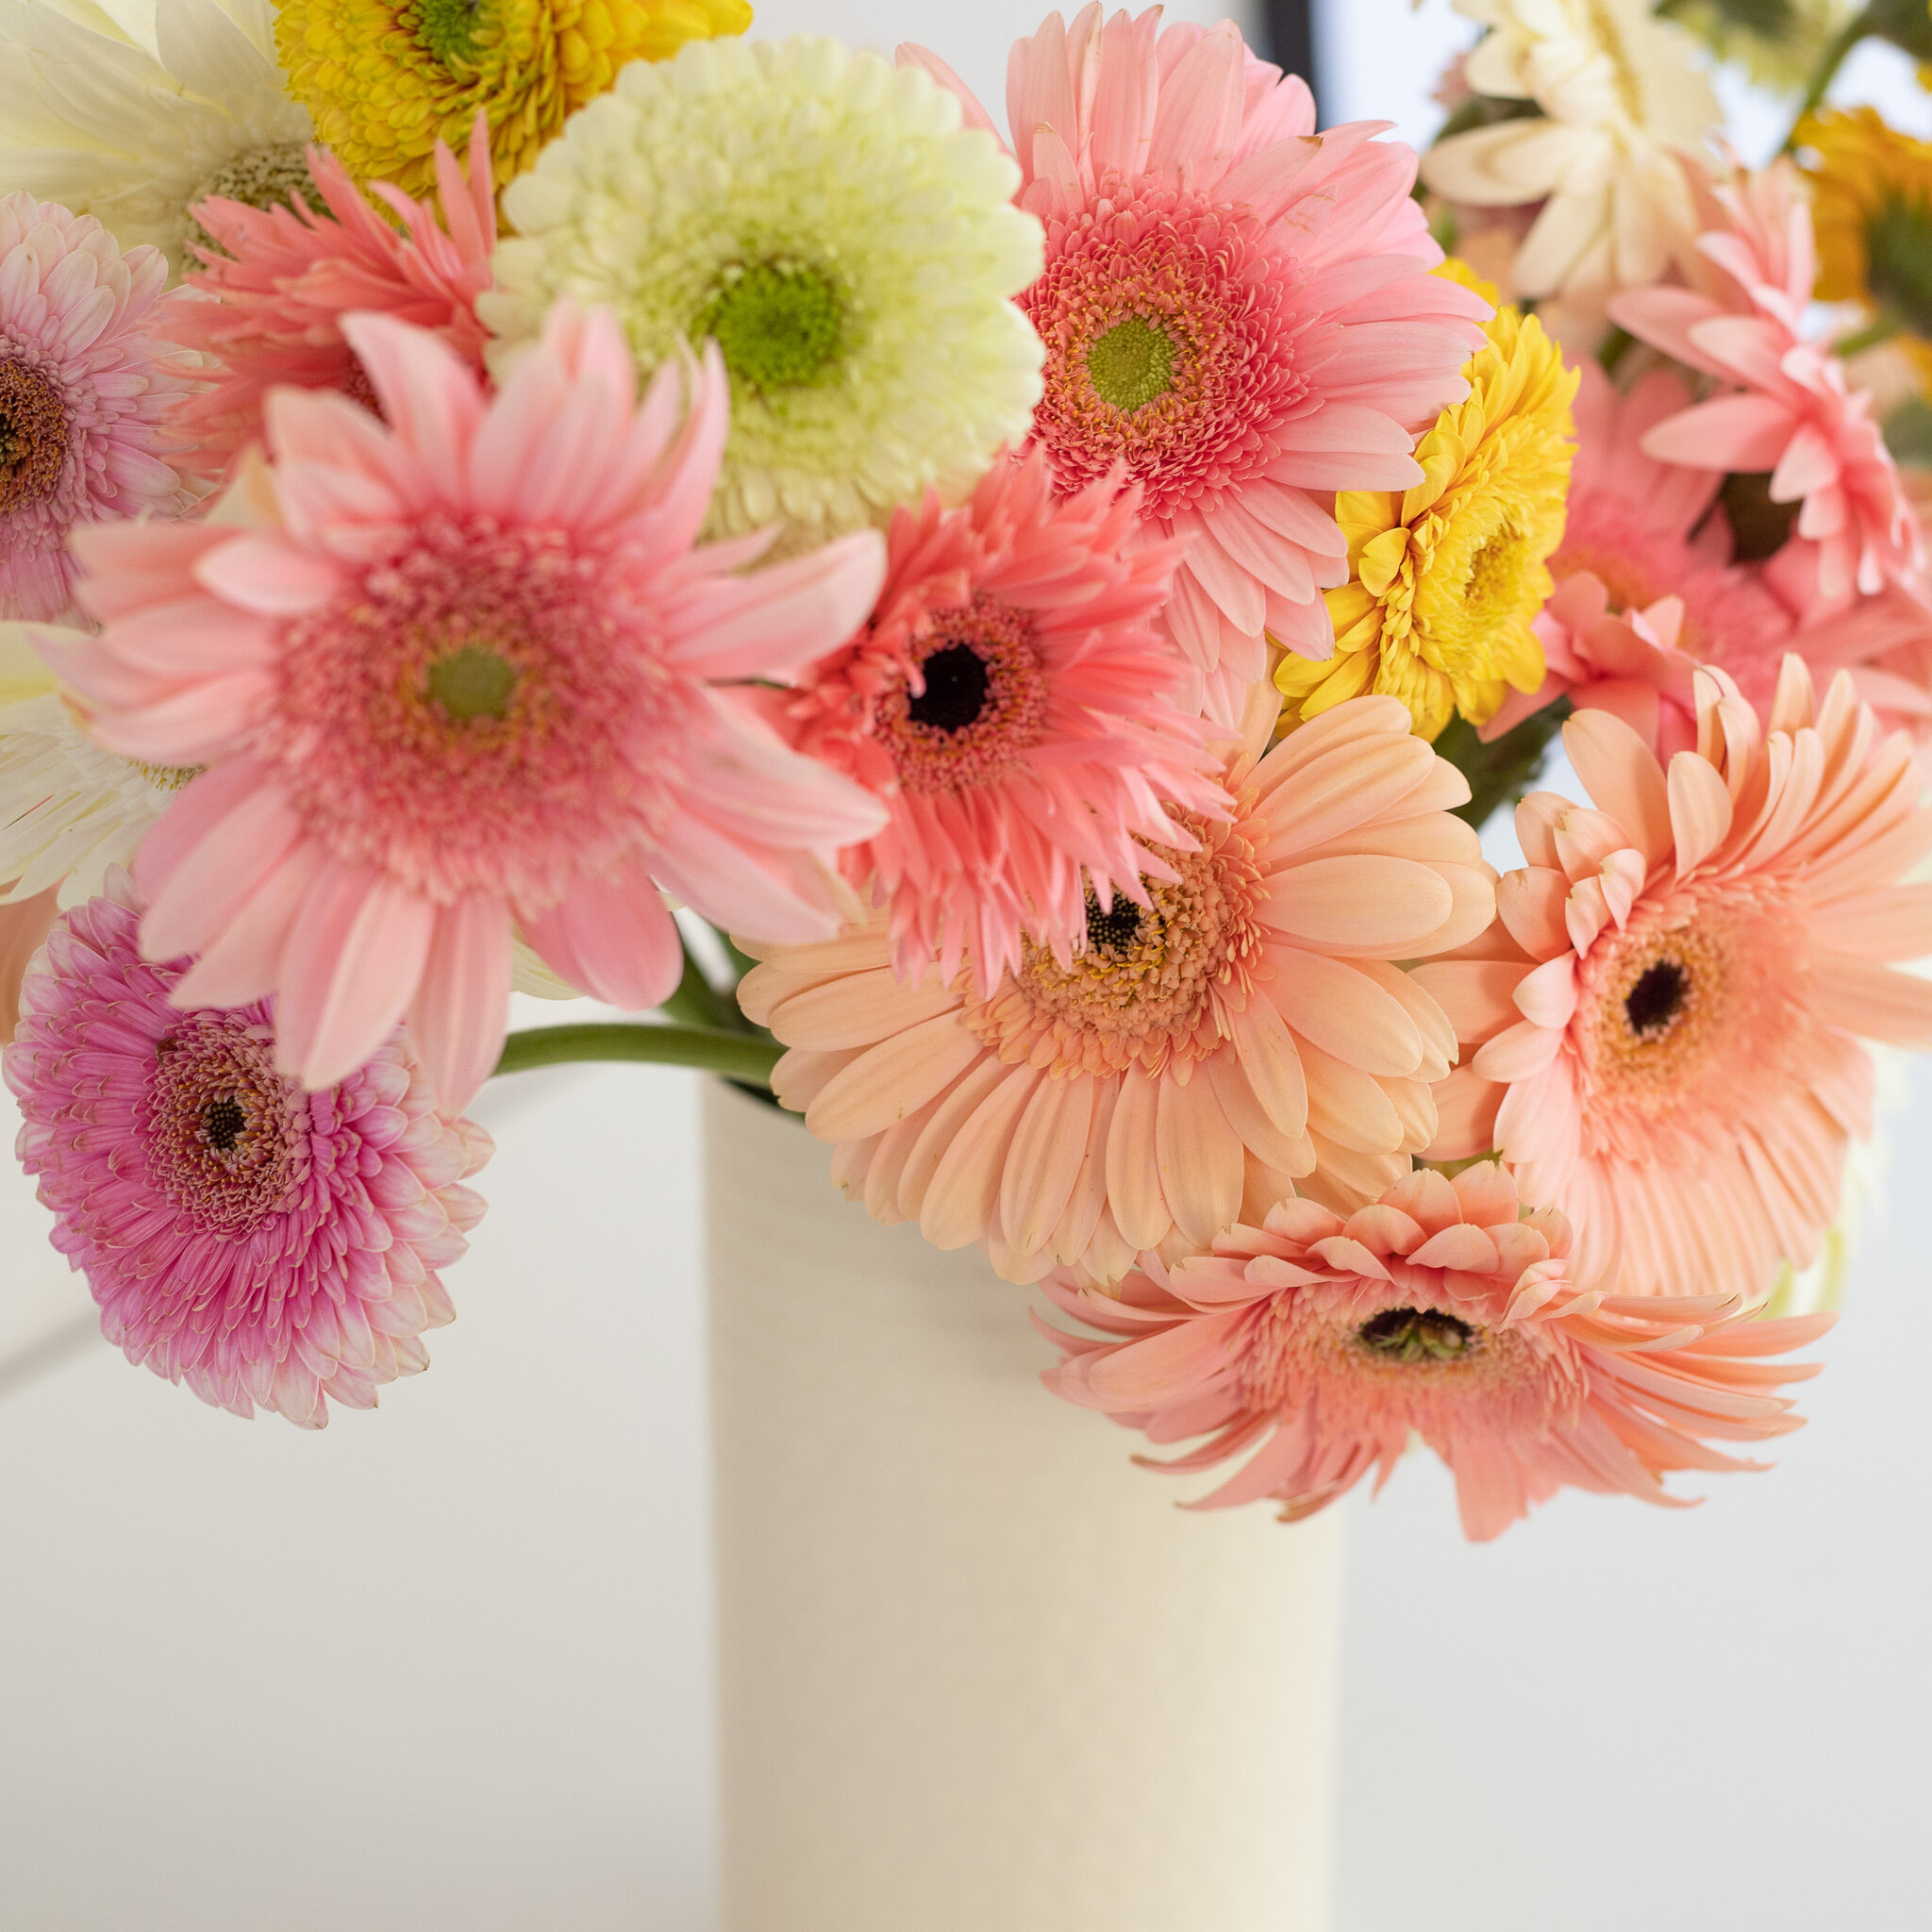 A bouquet of pink, peach, yellow, and ivory daisies in a cream colored vase